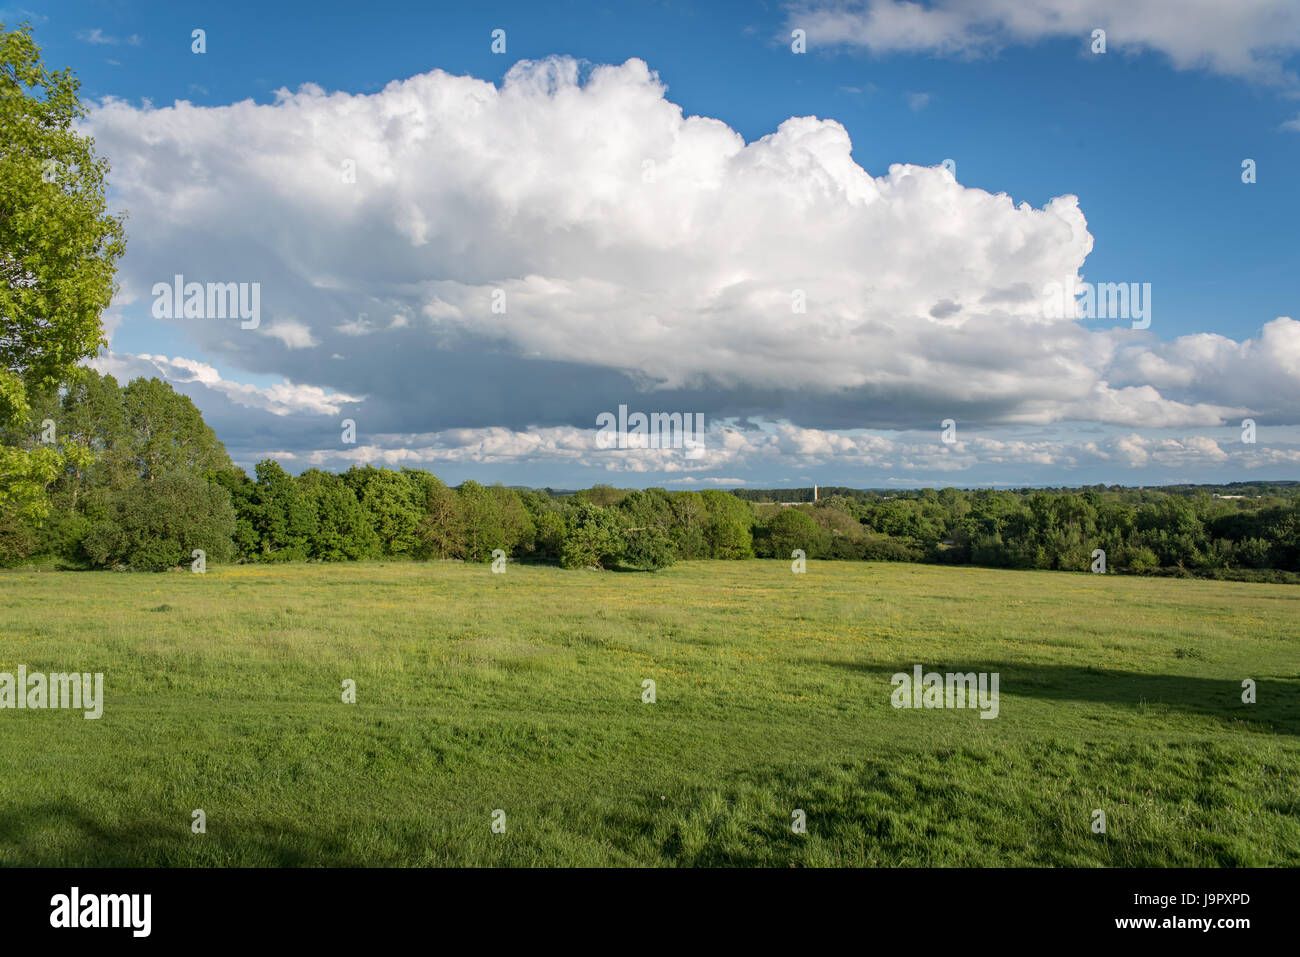 A field with a blue sky and big fluffy white clouds Stock Photo